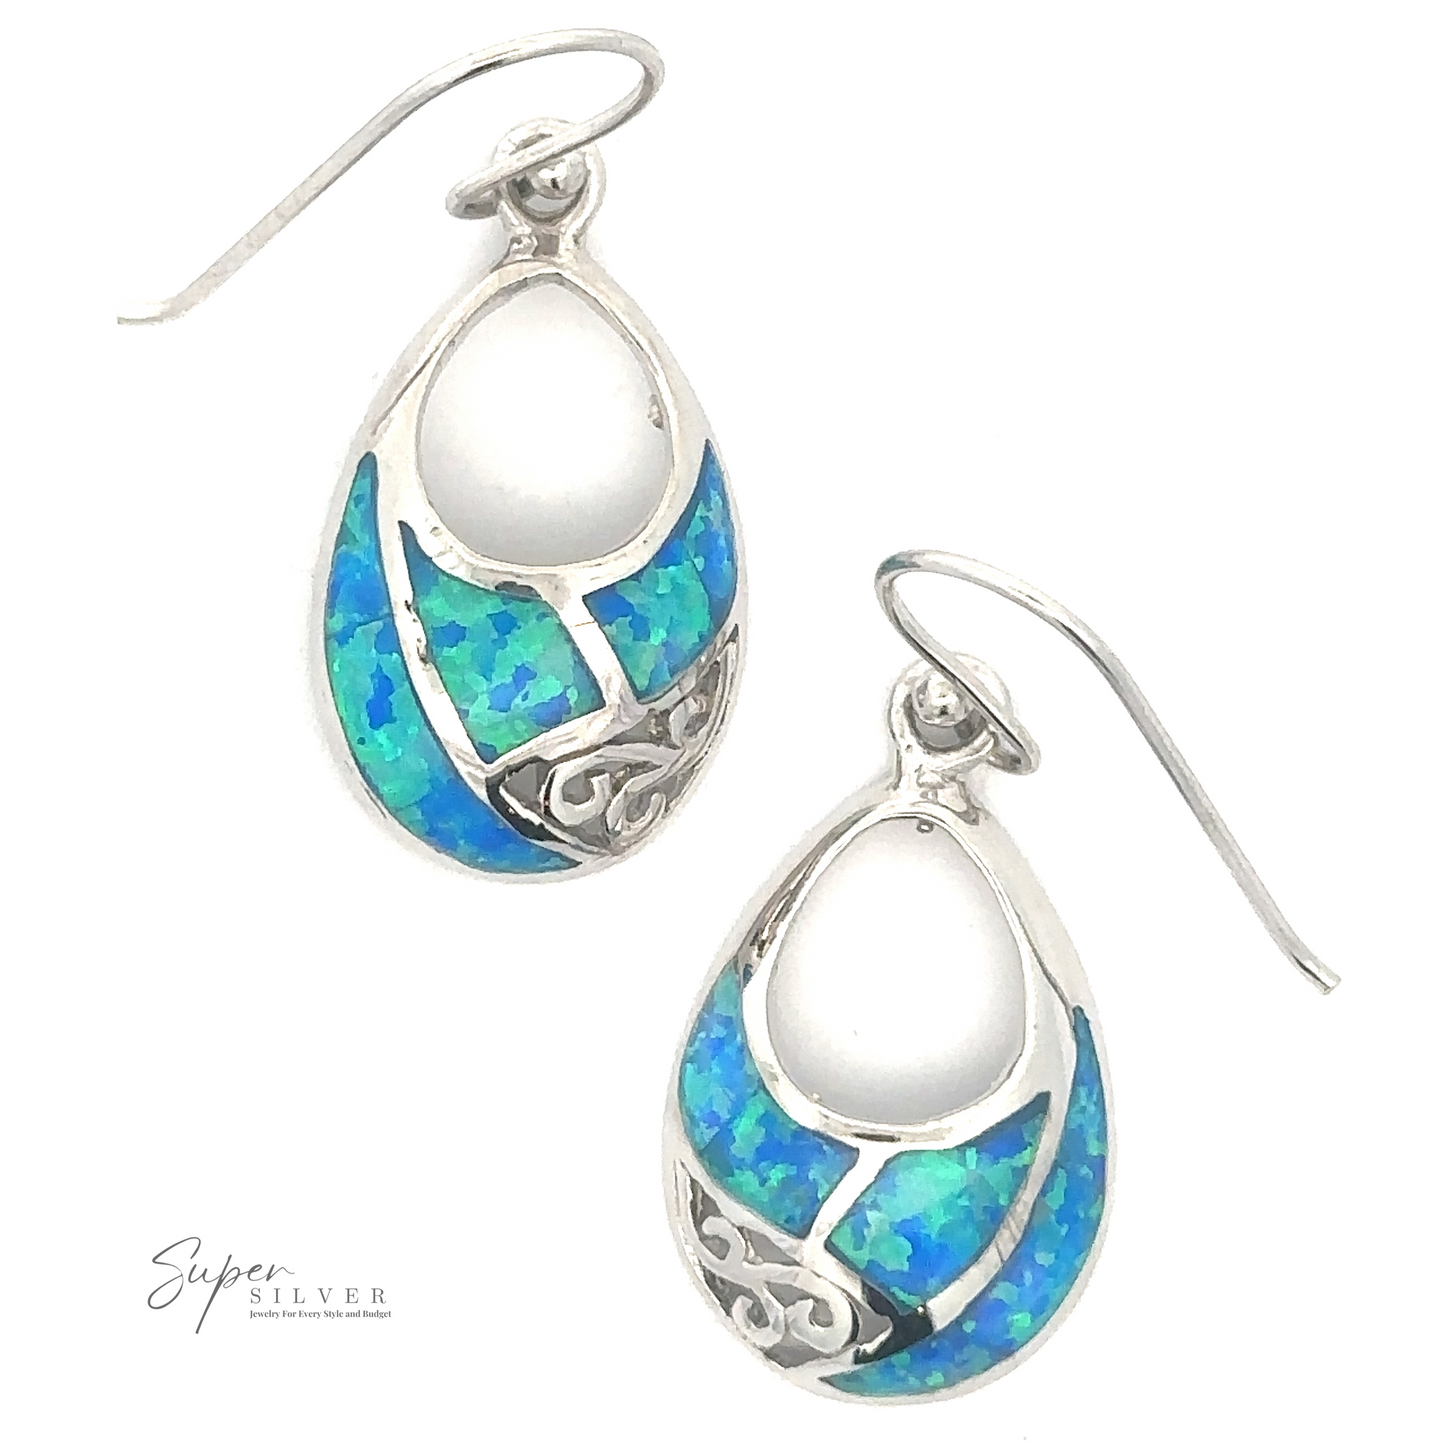 
                  
                    A pair of Blue Created Opal Teardrop Earrings with blue-green lab-created opal inlays and silver detailing. The earrings have hook-style closures and a refined rhodium finish.
                  
                